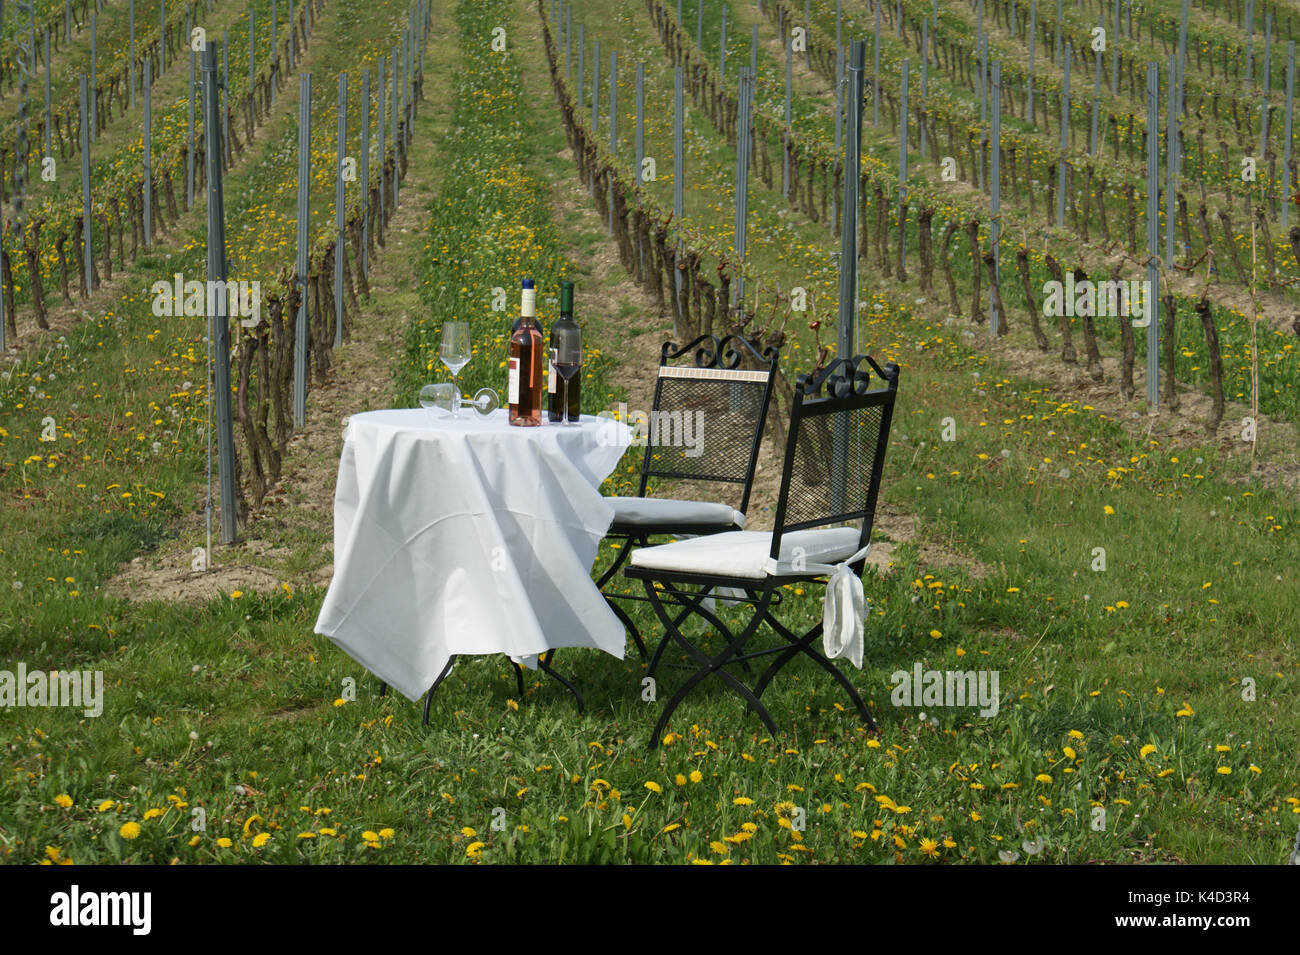 Table With Bottles Of Wine On It In A Vineyard, Picknick In A Vineyard Stock Photo